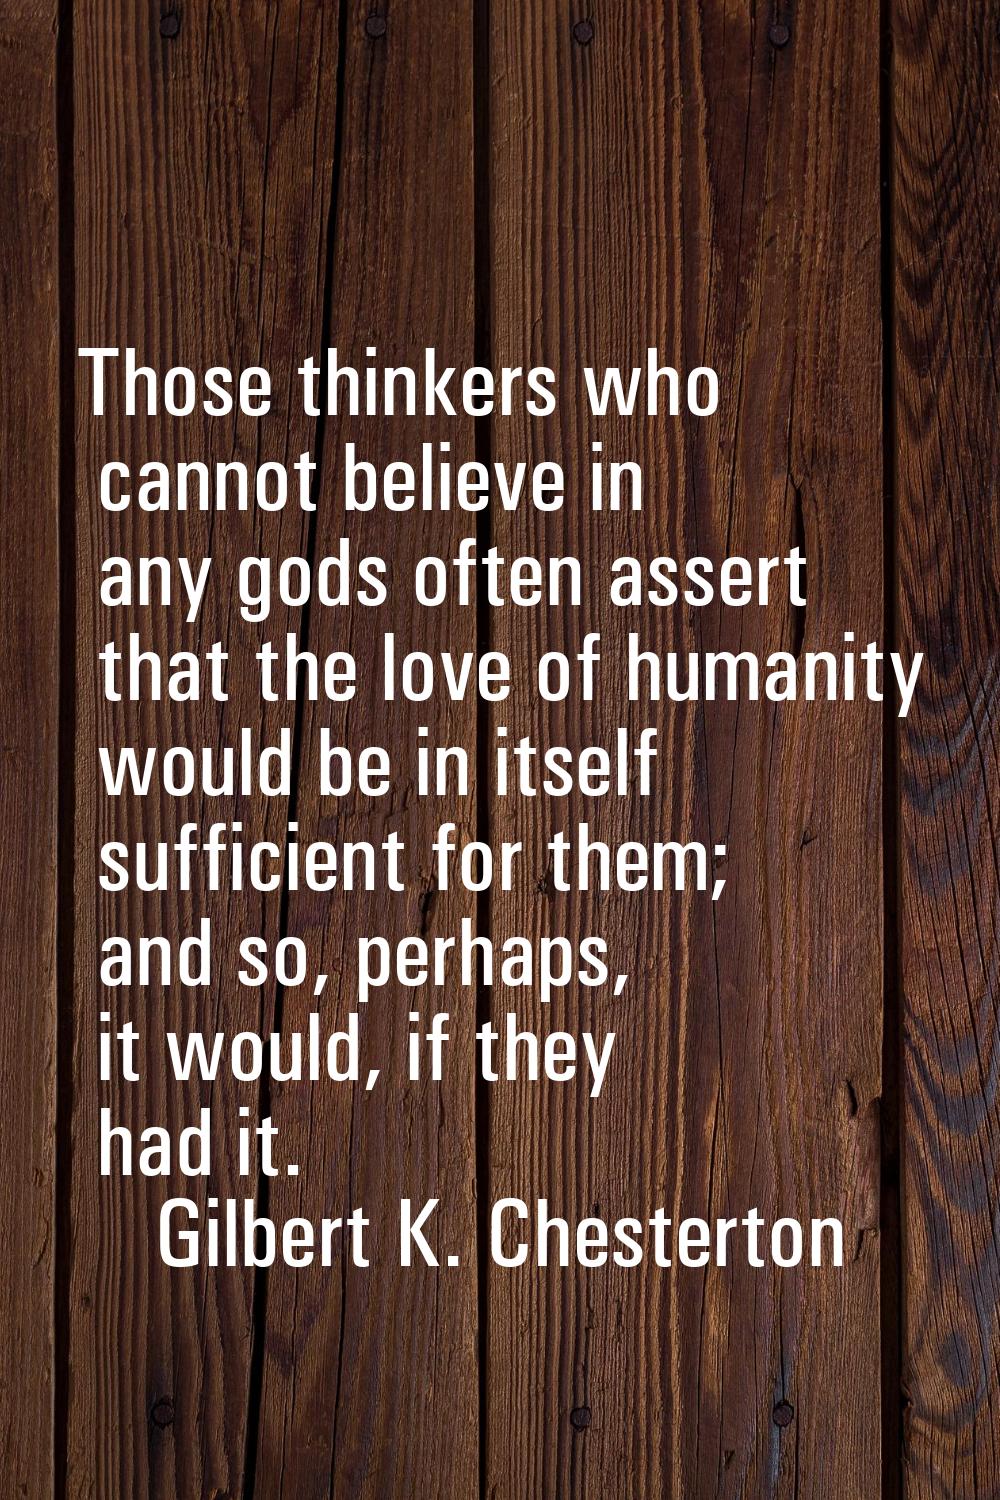 Those thinkers who cannot believe in any gods often assert that the love of humanity would be in it